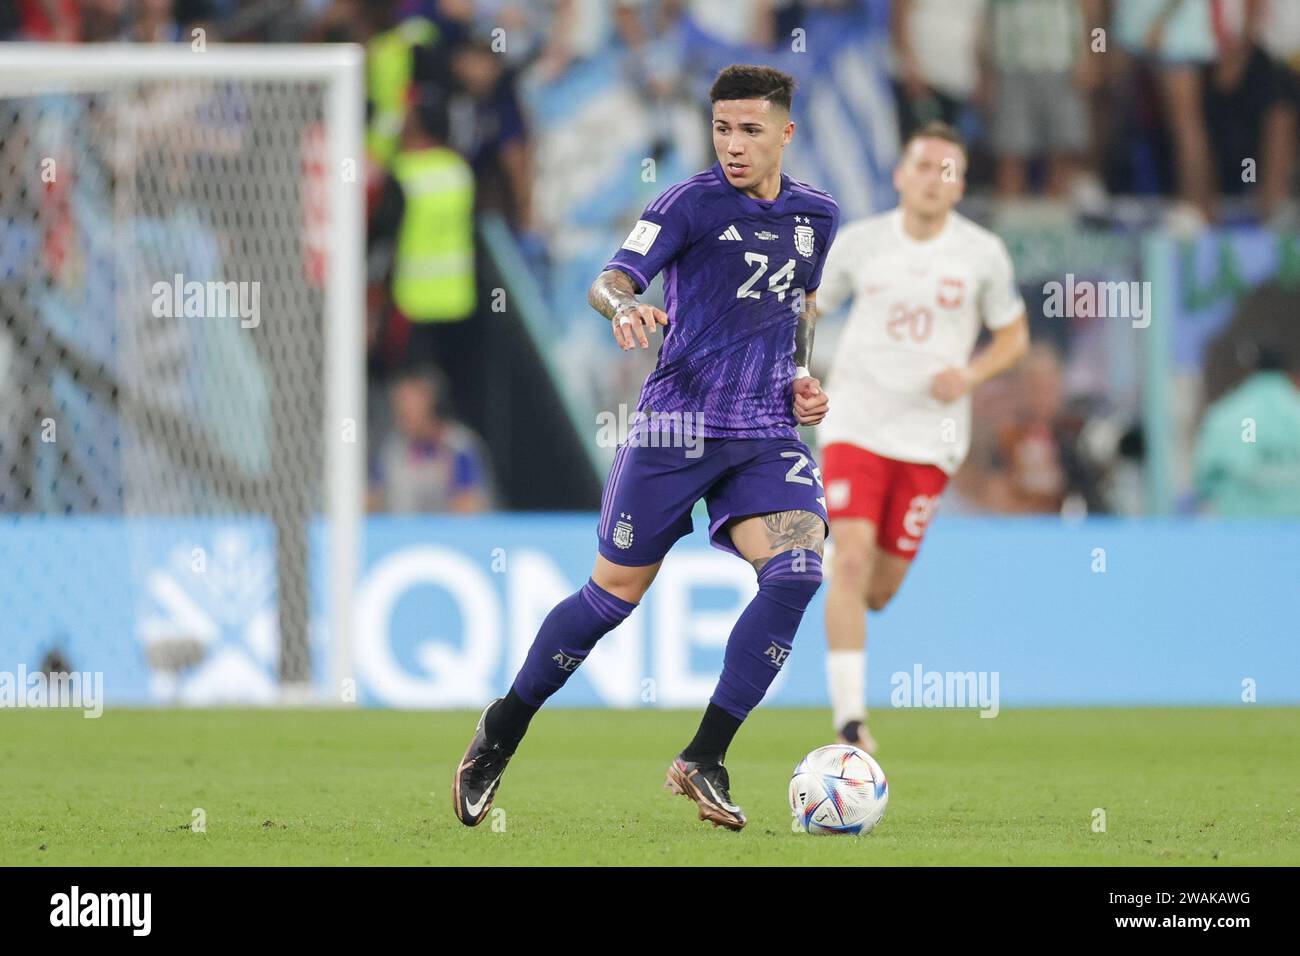 Enzo Fernandez of Argentina seen in action during the FIFA World Cup Qatar 2022 match between Poland and Argentina at Stadium 974. Final score; Poland 0:2 Argentina. Stock Photo